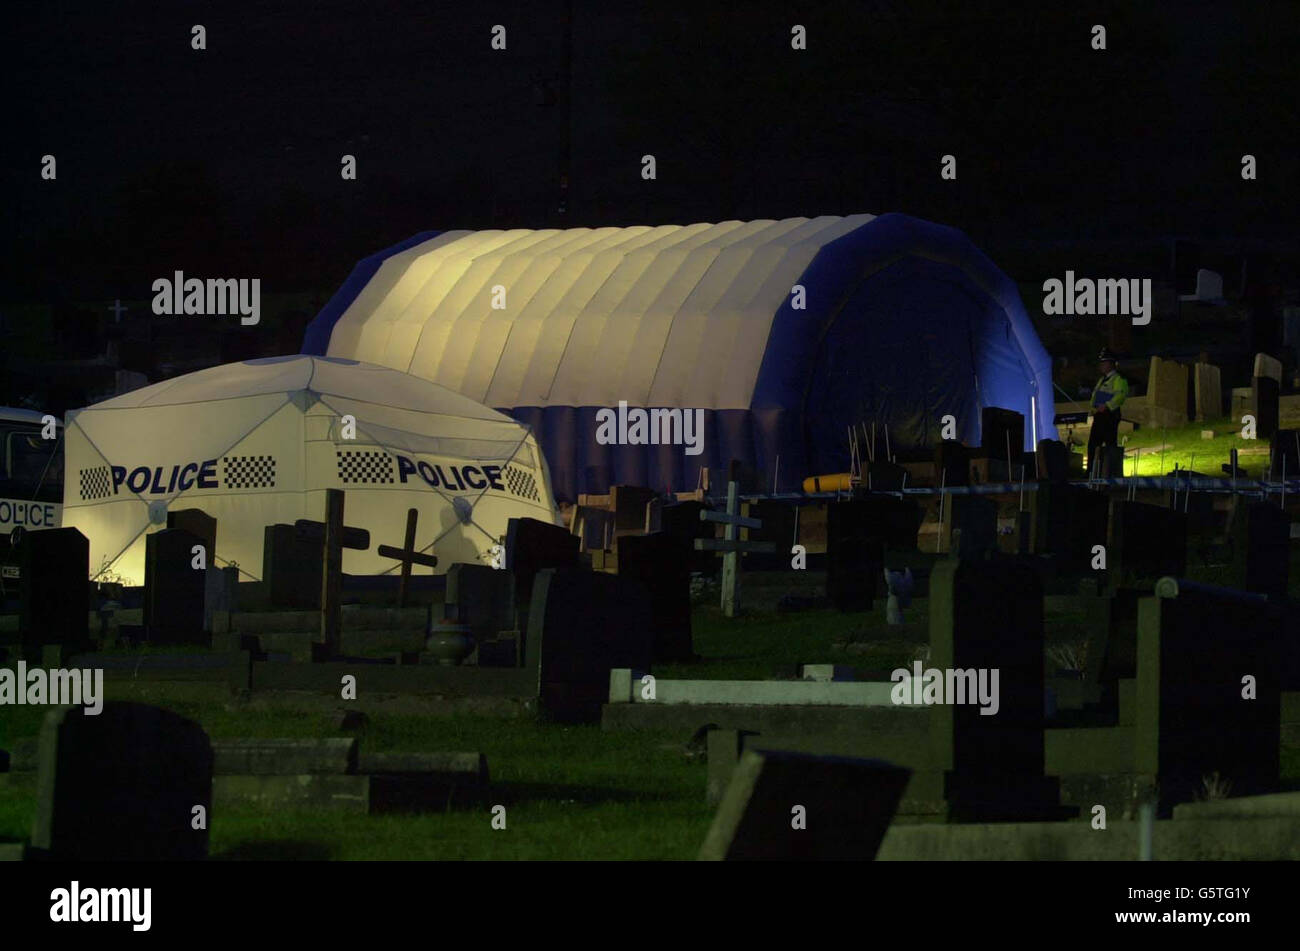 A police tent covers the grave of Joseph Kappen at Goytre Cemetery near Port Talbot, South Wales, as dawn breaks. Police are exhuming his body because Kappen is a prime suspect in the investigation into the murders of three teenage girls nearly 30 years ago. Stock Photo